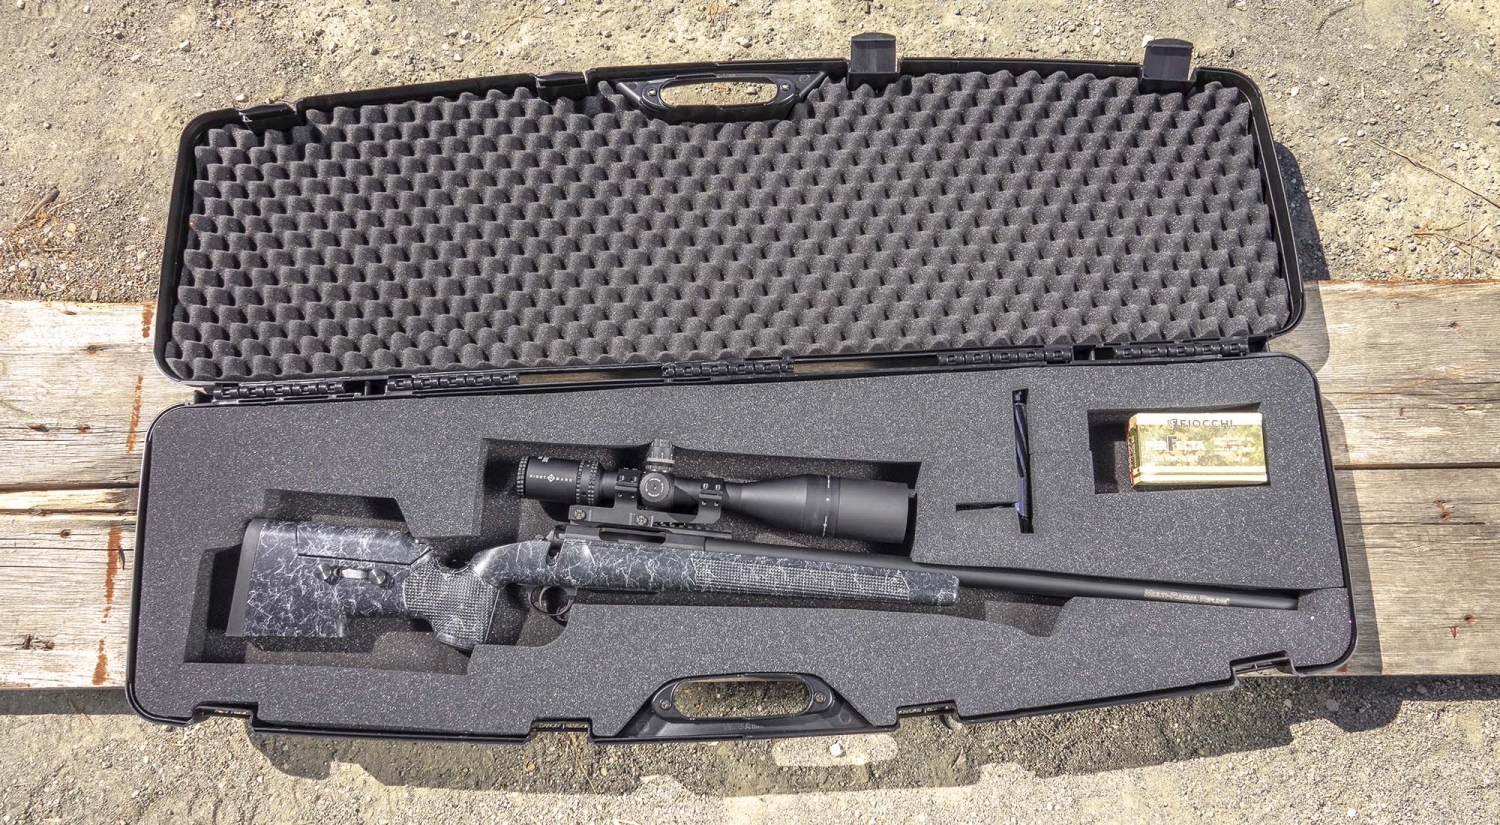 The Sabatti Tactical EVO rifle comes from factory in a padded ABS case that allows the rifle to be carried with a mounted scope